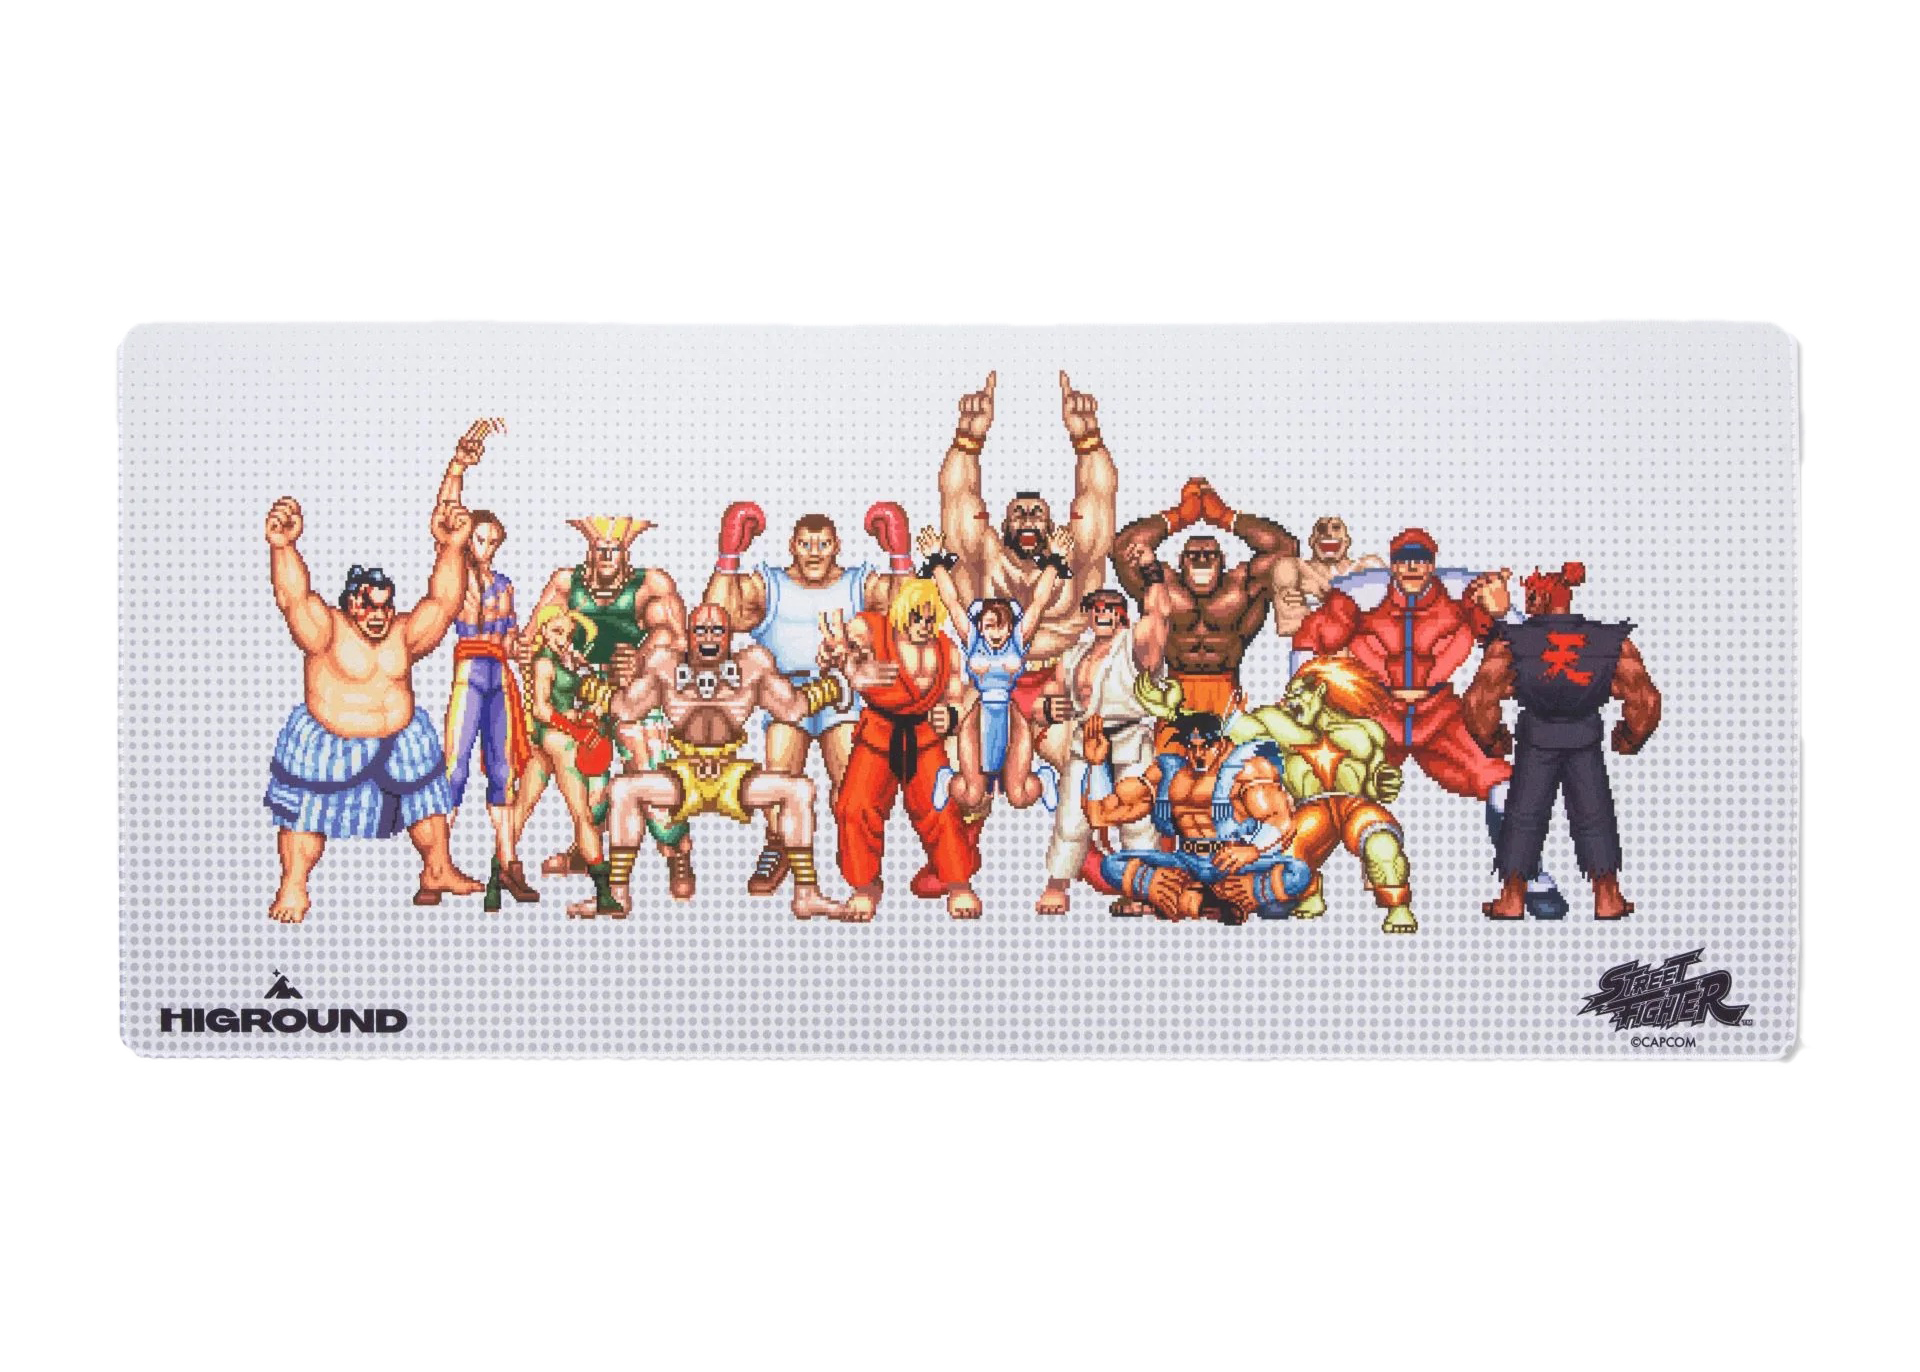 Super Street Fighter 2 (Ryu Victory Pose) – Retro Games Crafts